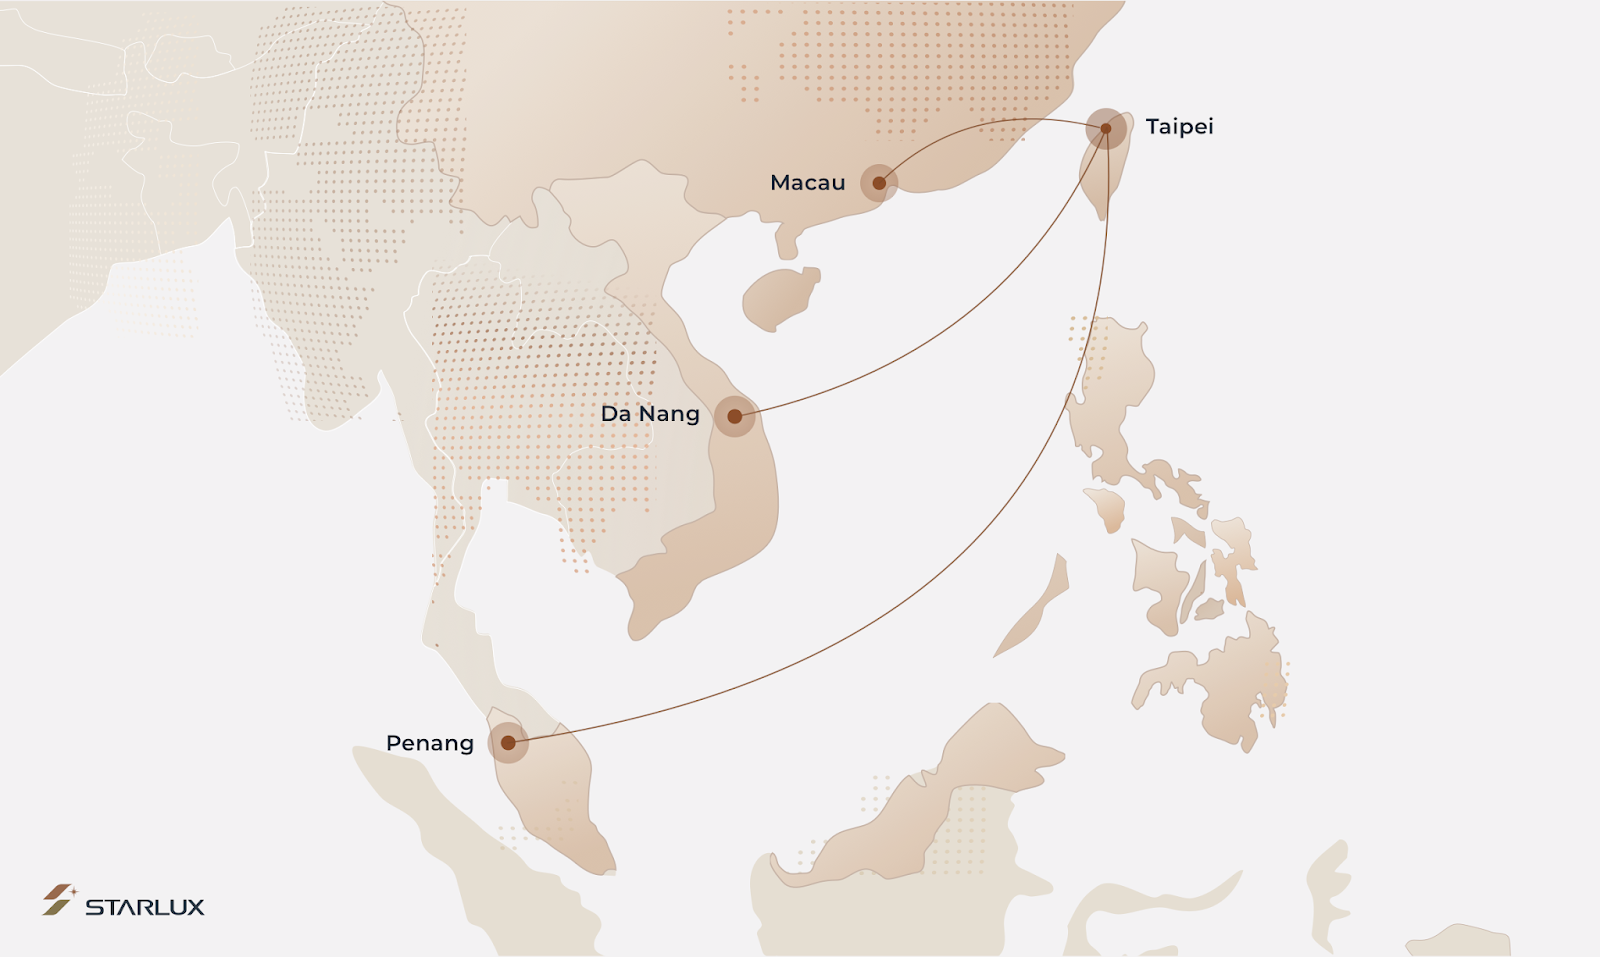 Penang - Taipei Direct Flight via New Luxury Boutique Airlines STARLUX